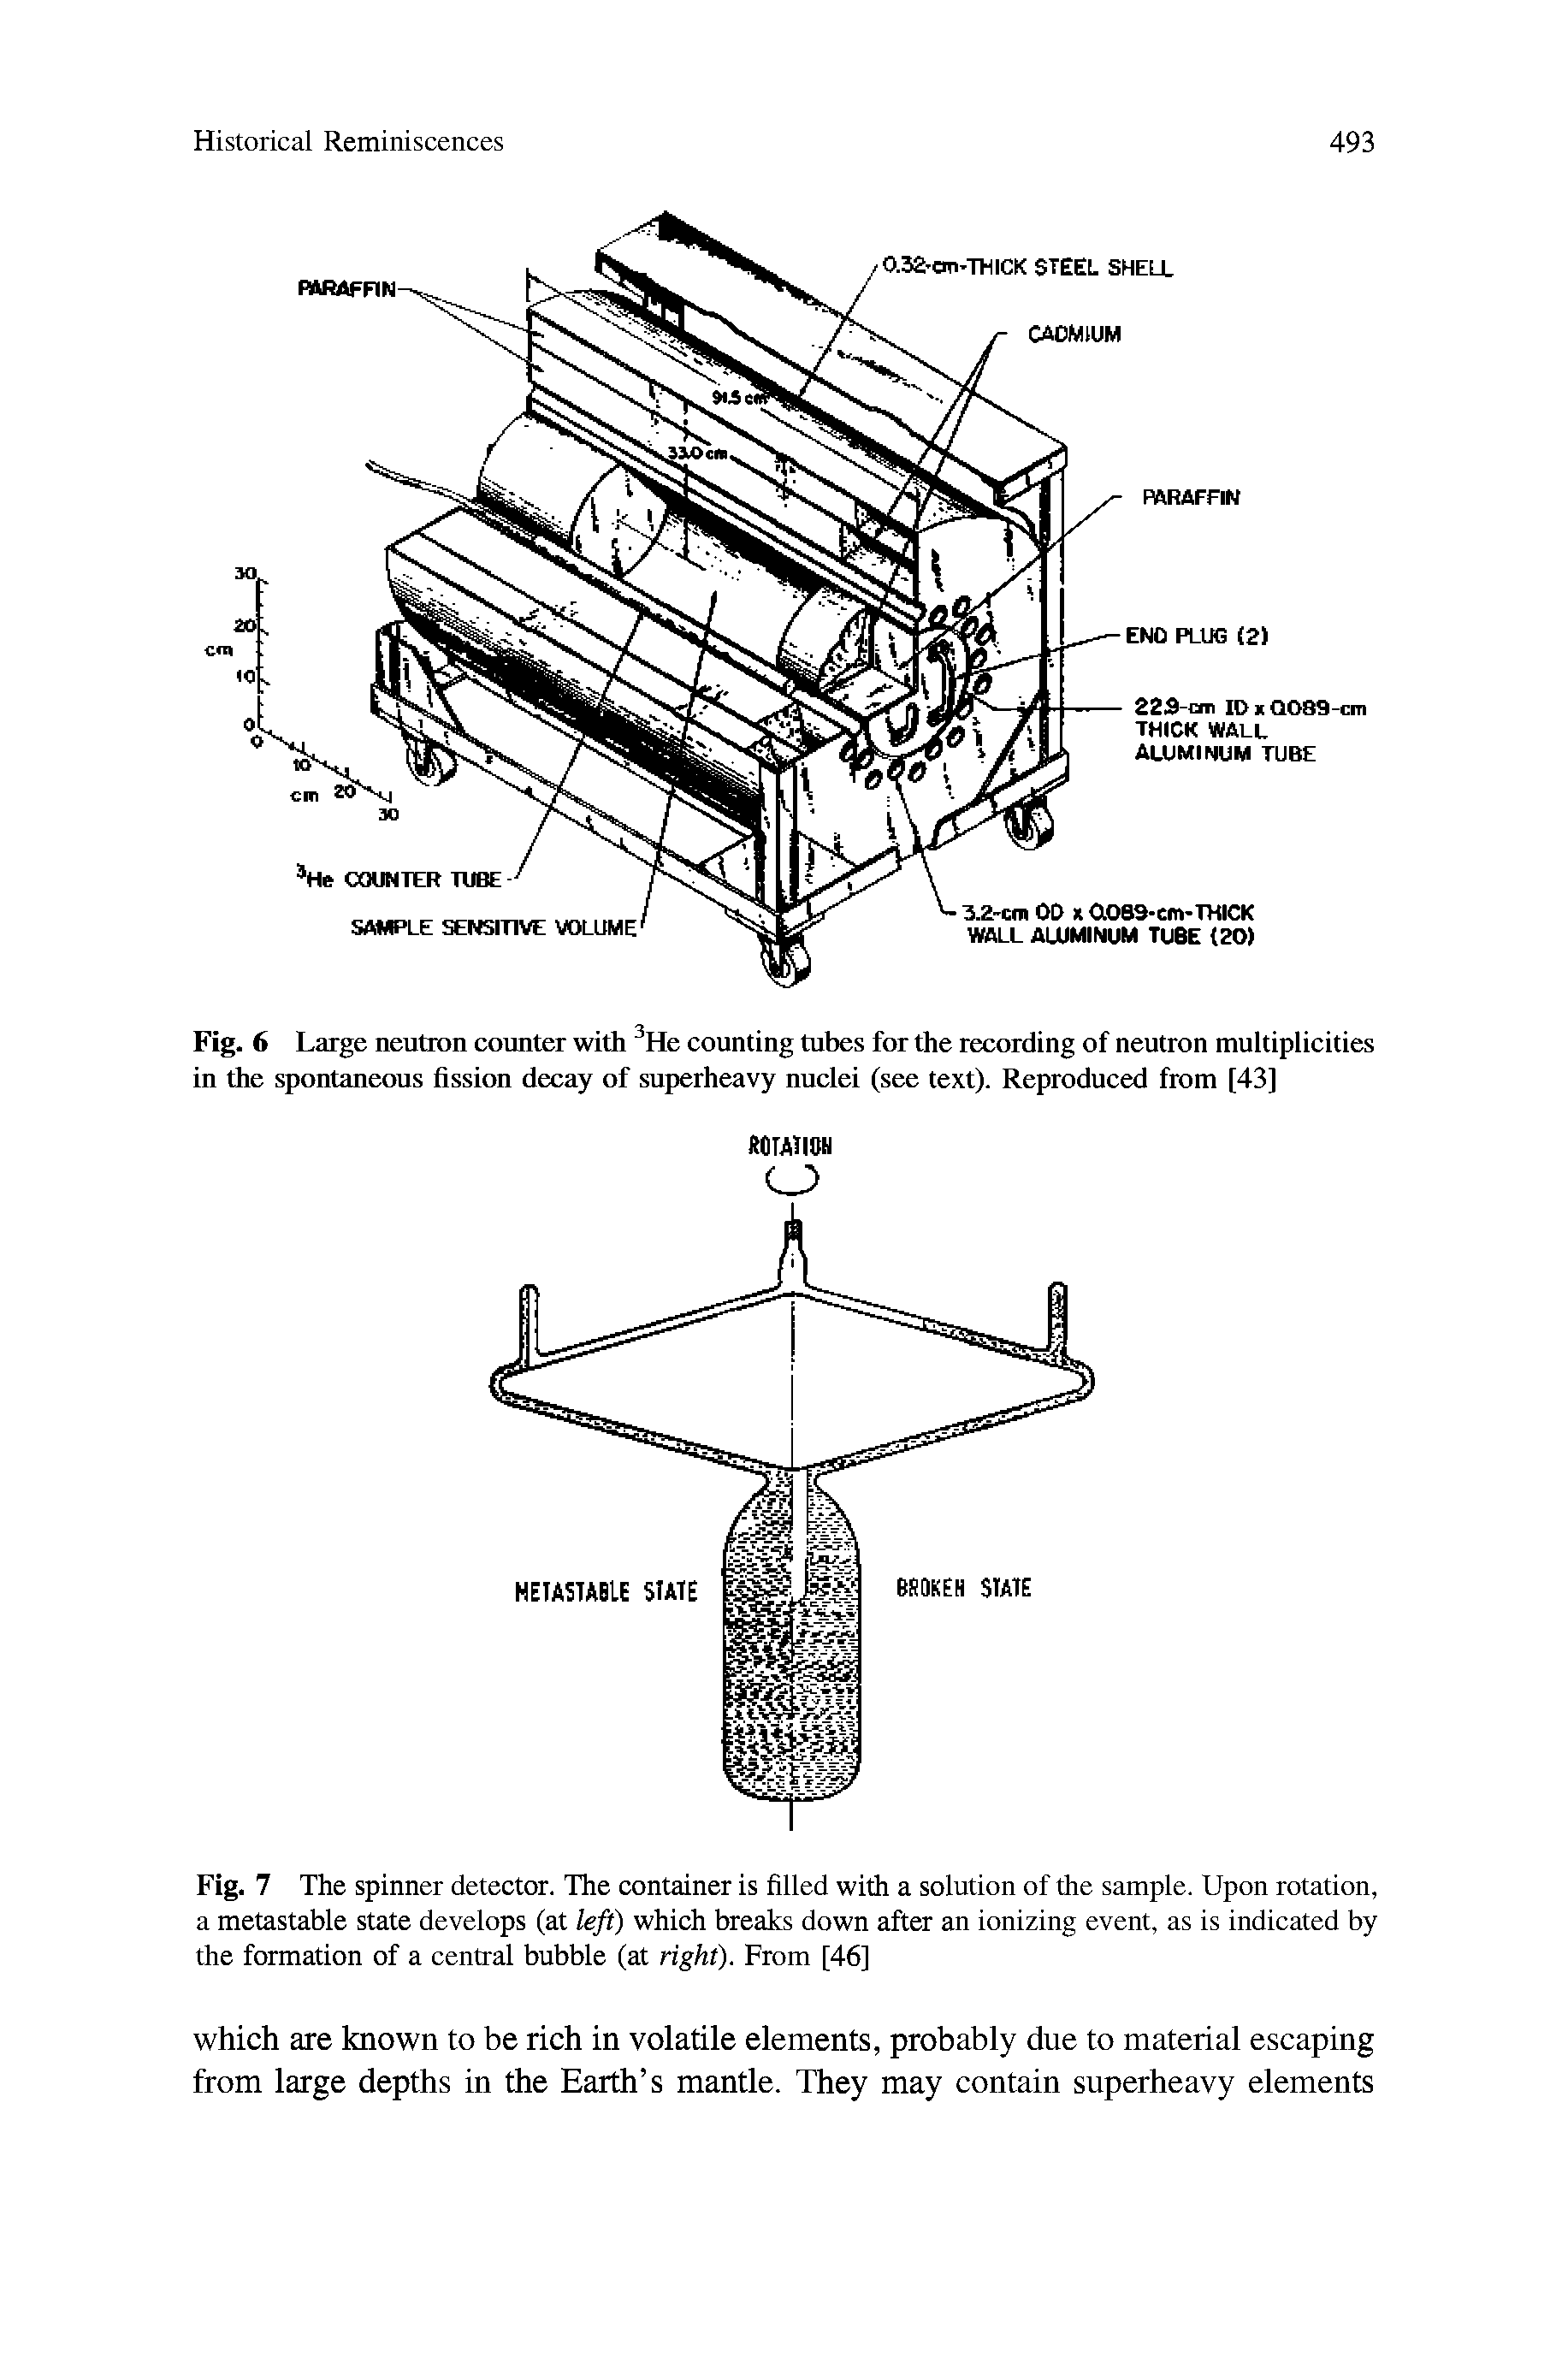 Fig. 6 Large neutron counter with He counting tubes for the recording of neutron multiplicities in the spontaneous fission decay of superheavy nuclei (see text). Reproduced from [43]...